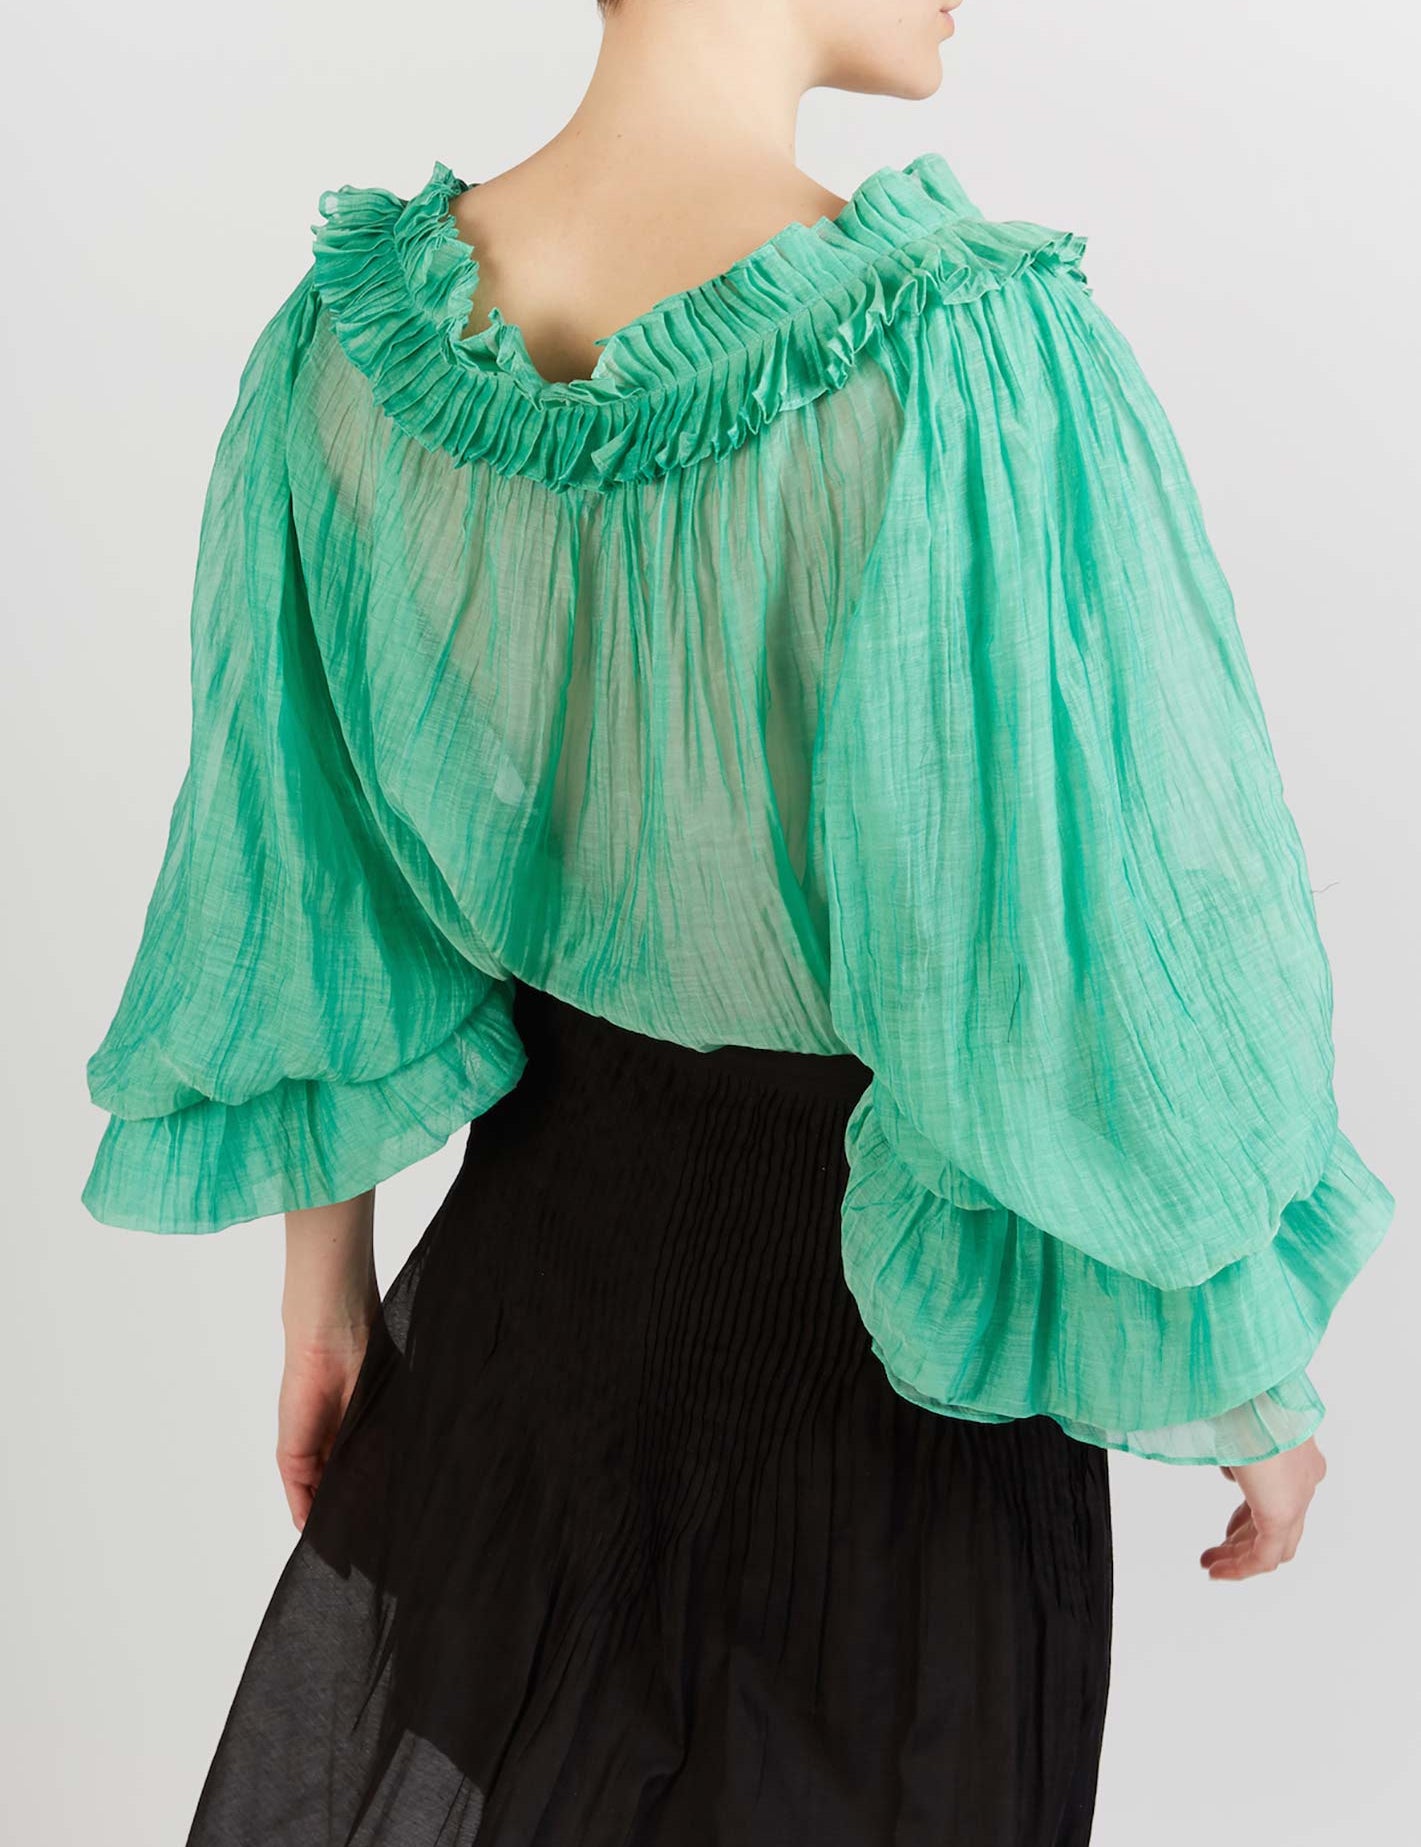 Back view of Roussia Veridian Green Blouse by Thierry Colson photographed by Stéphane Gautronneau